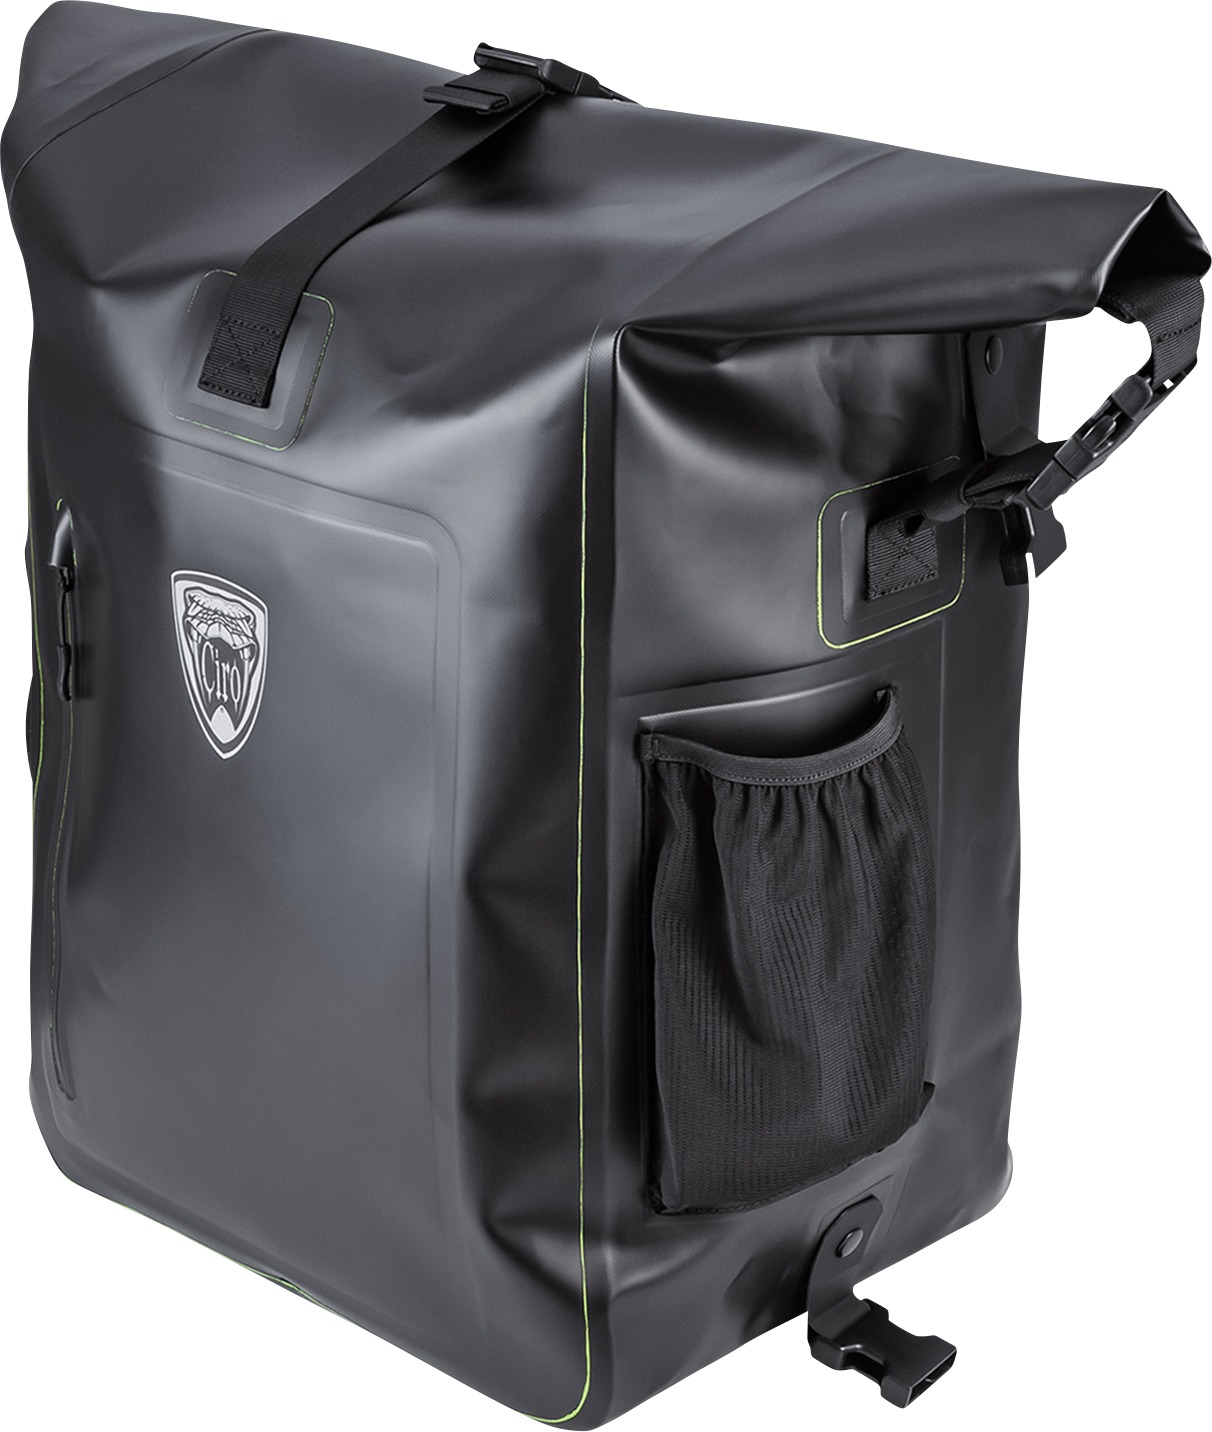 Dryforce Waterproof Roll Top Bag 60L - Click Image to Close